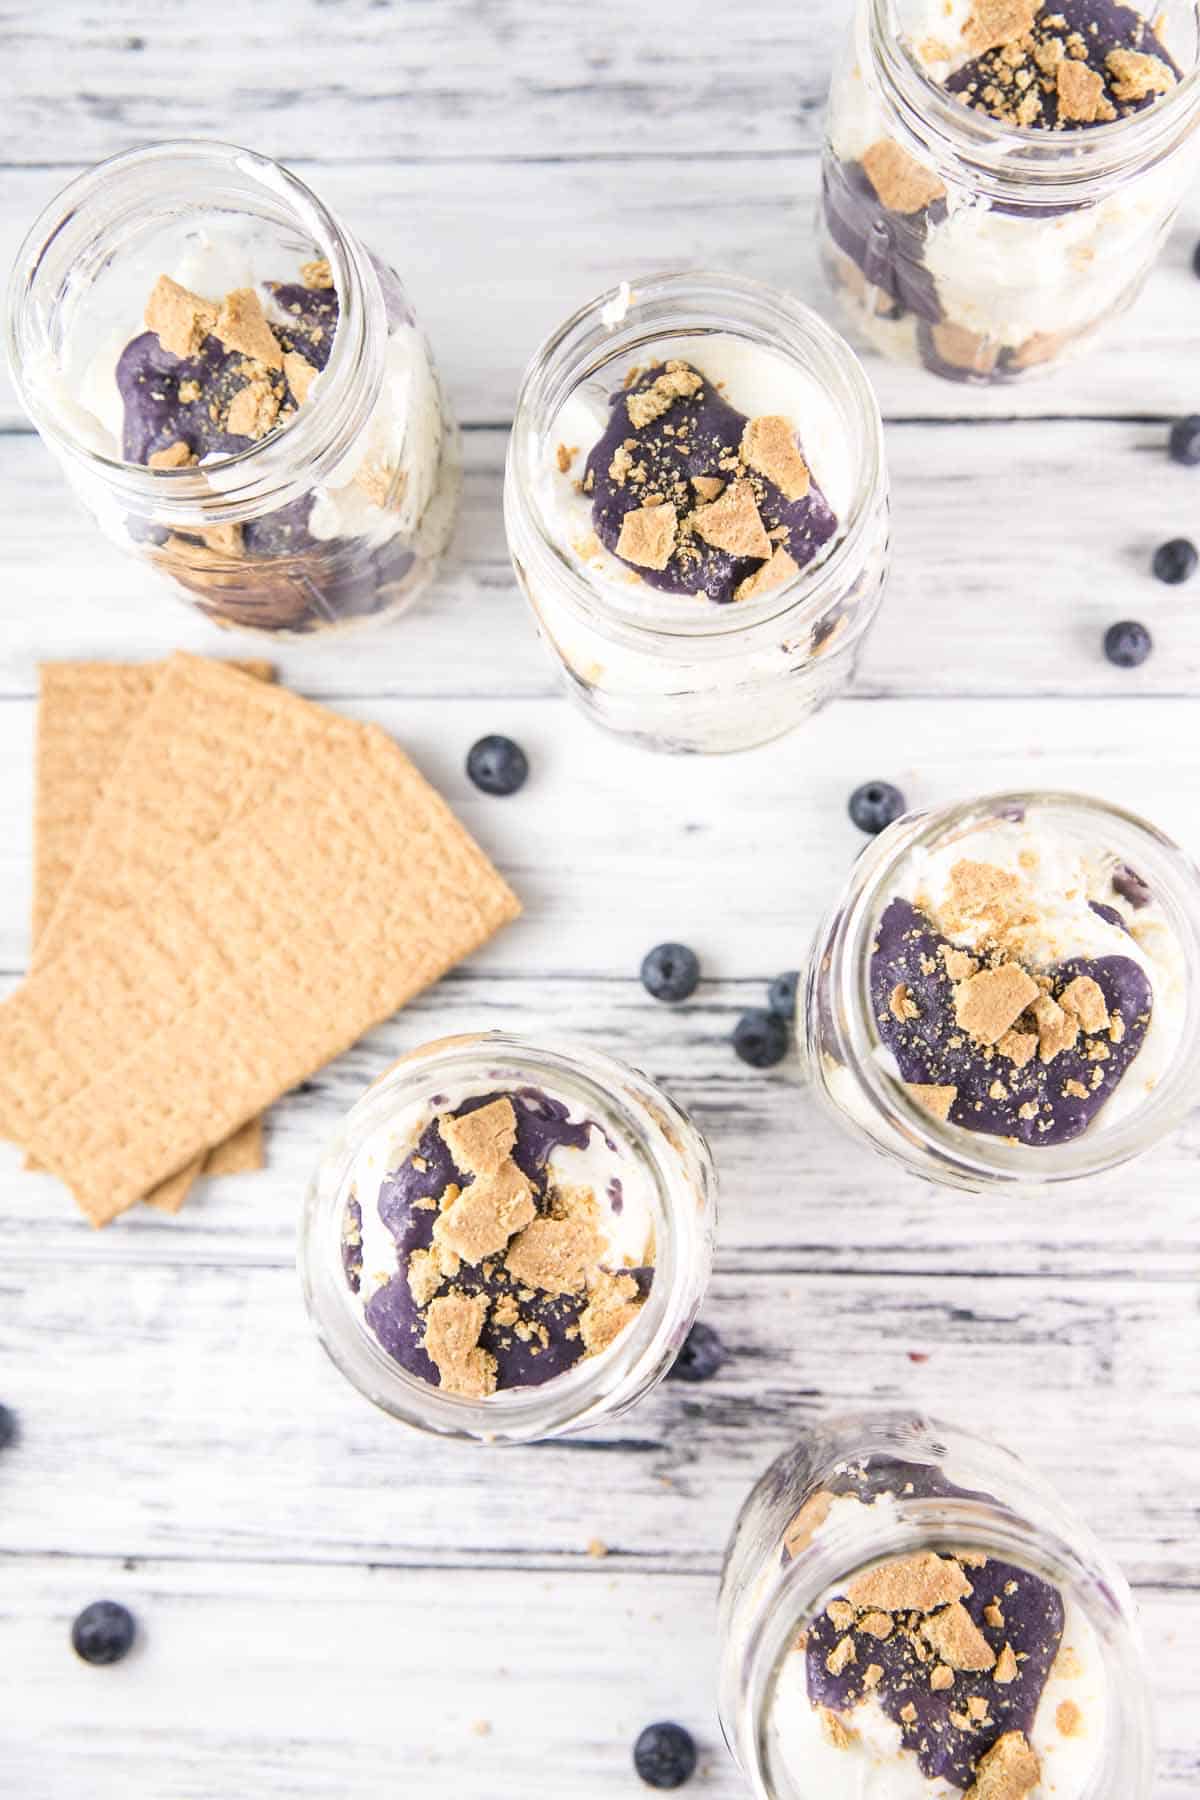 No Bake Cheesecake Parfaits with Blueberry Curd: an easy, fancy, make ahead treat perfect for dinner parties. Layers of a cream cheese and mascarpone cheesecake, blueberry cardamom curd, and crumbled graham crackers. #bunsenburnerbakery #cheesecake #cheesecakeparfaits #nobakedesserts